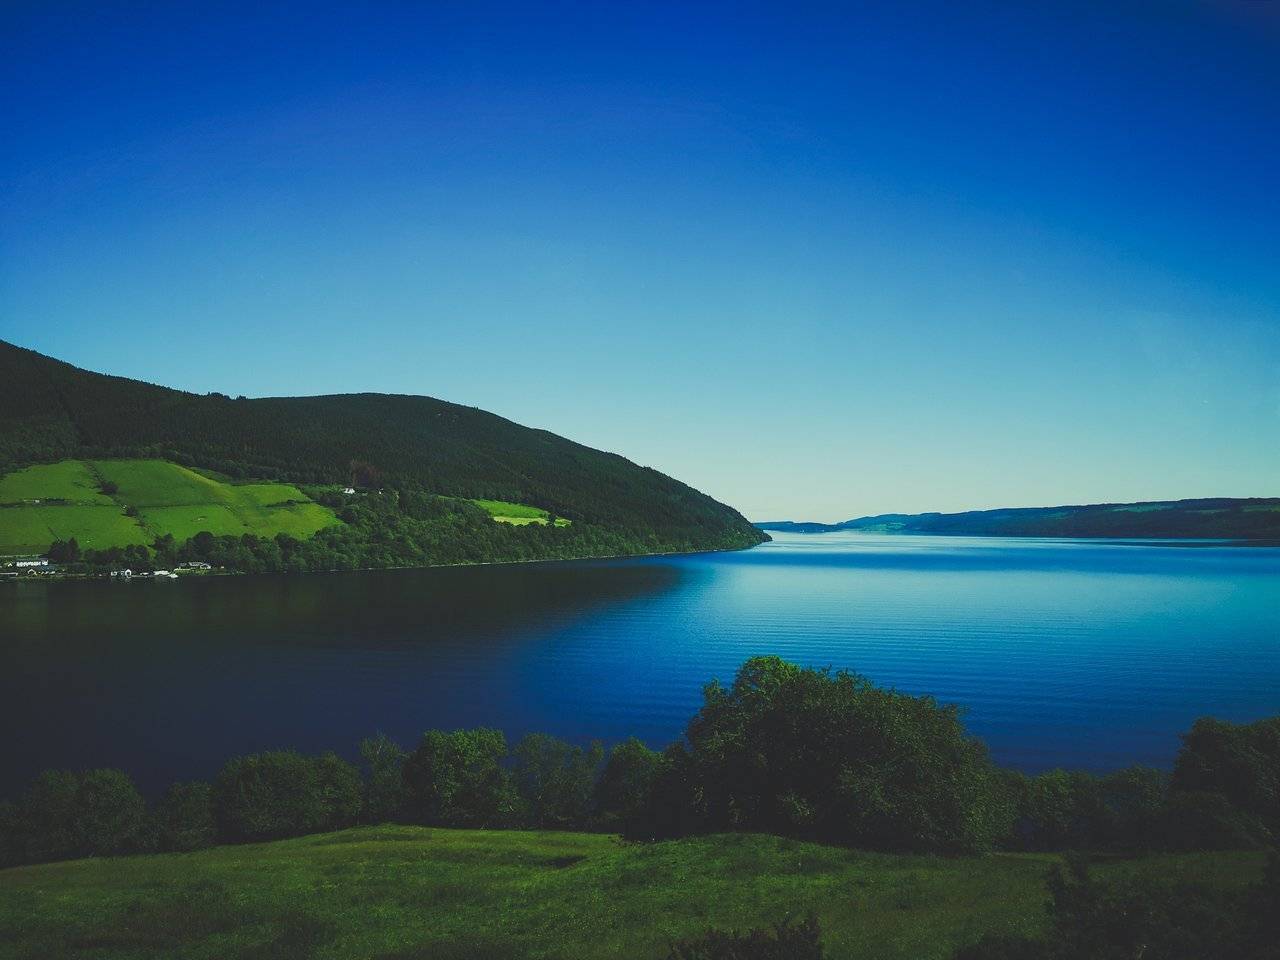   Loch Ness surounded by hills on a sunny day, Highlands of Scotland. Photo by Alis Monte [CC BY-SA 4.0], via Connecting the Dots